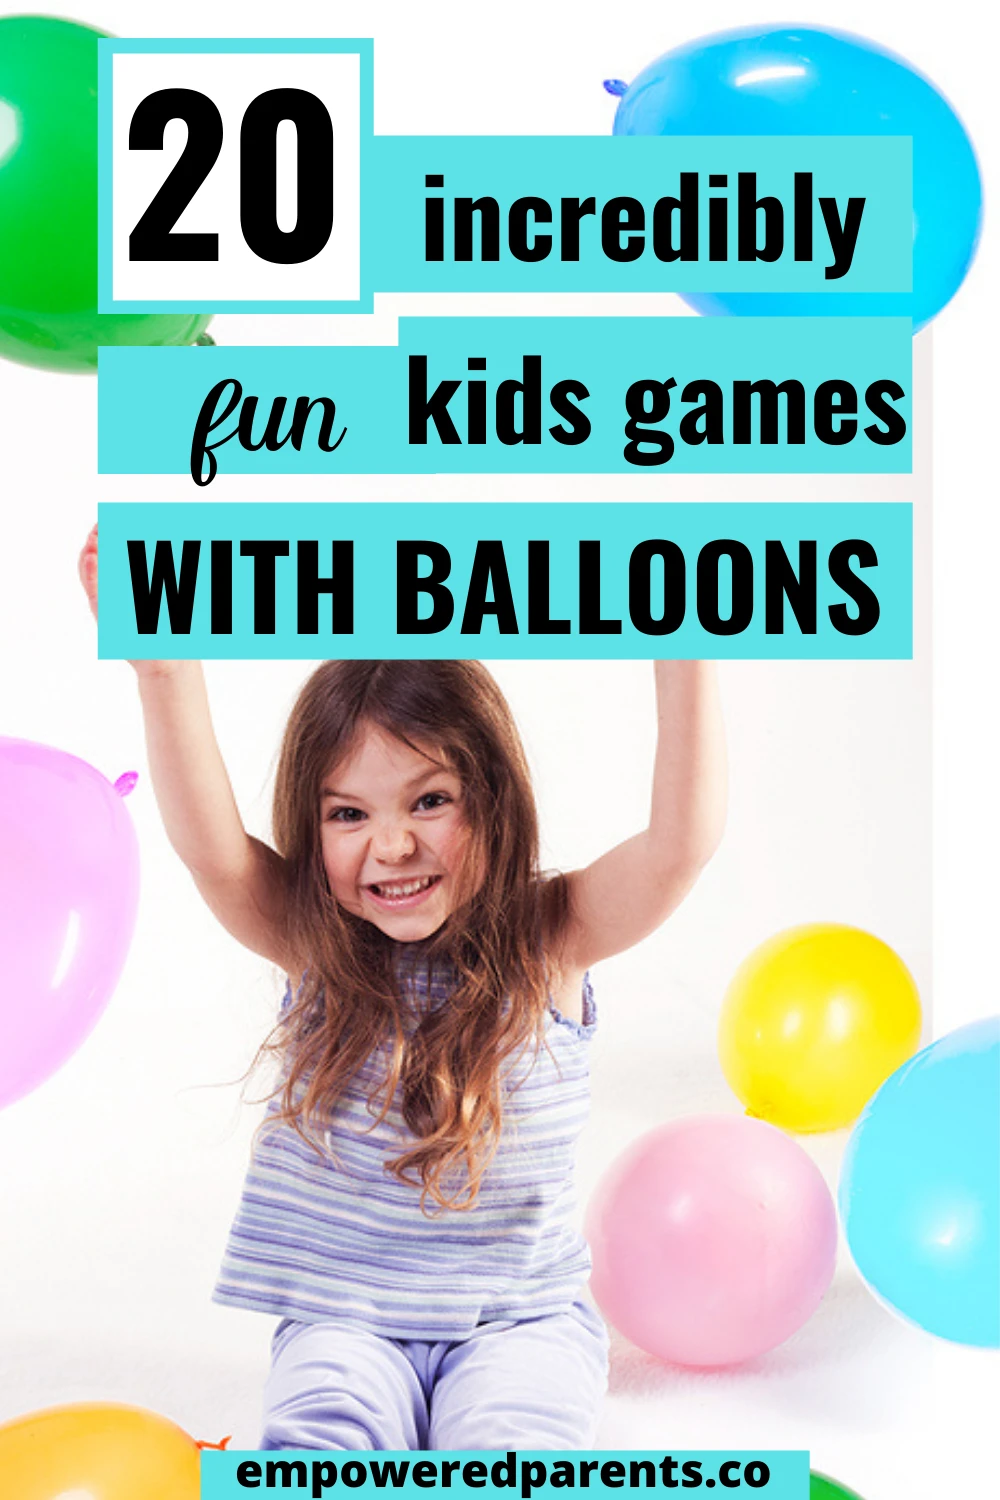 20 incredibly fun kids games with balloons pinterest image